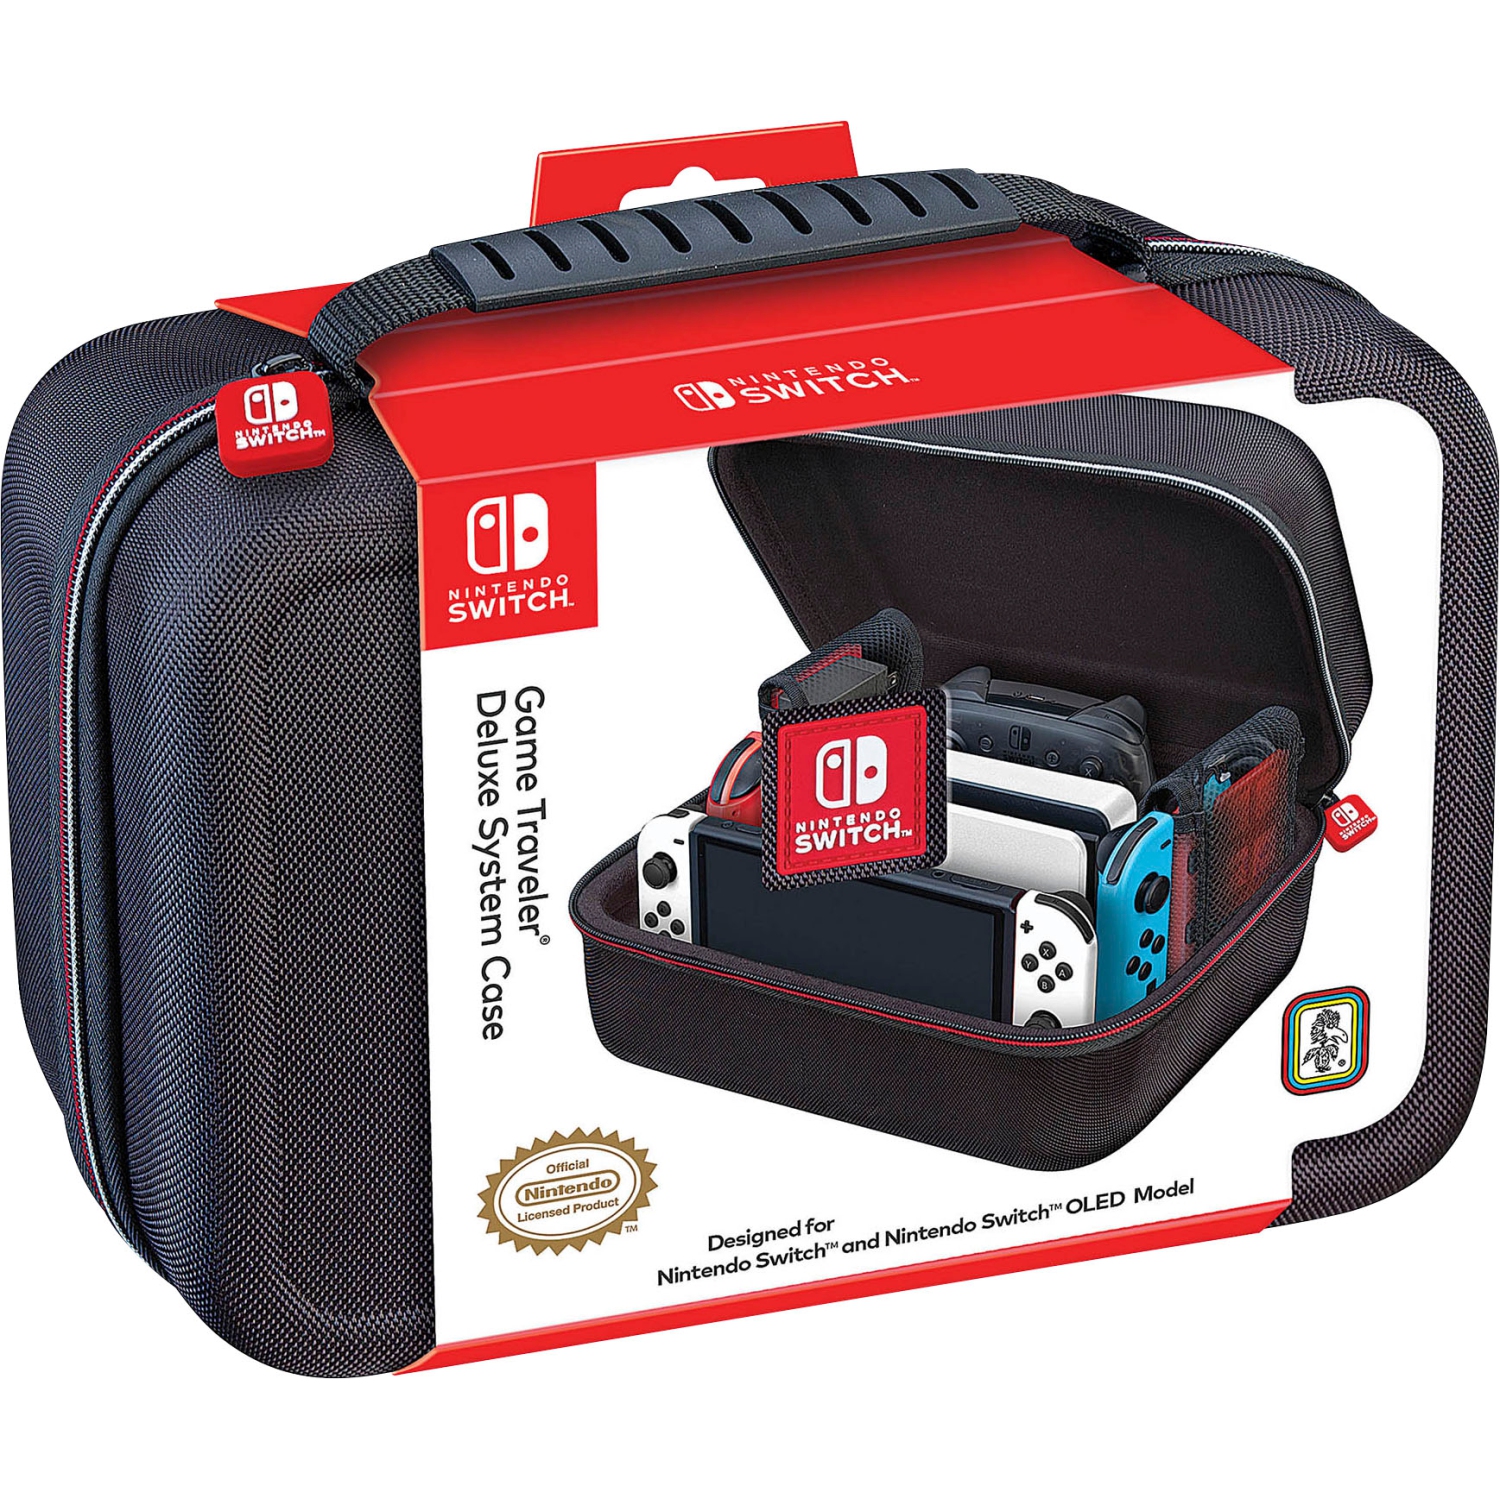 Nintendo Switch / OLED Switch System Carrying Case – Protective Deluxe Travel System Case – Black Ballistic Nylon Exterior – Official Nintendo Licensed Product